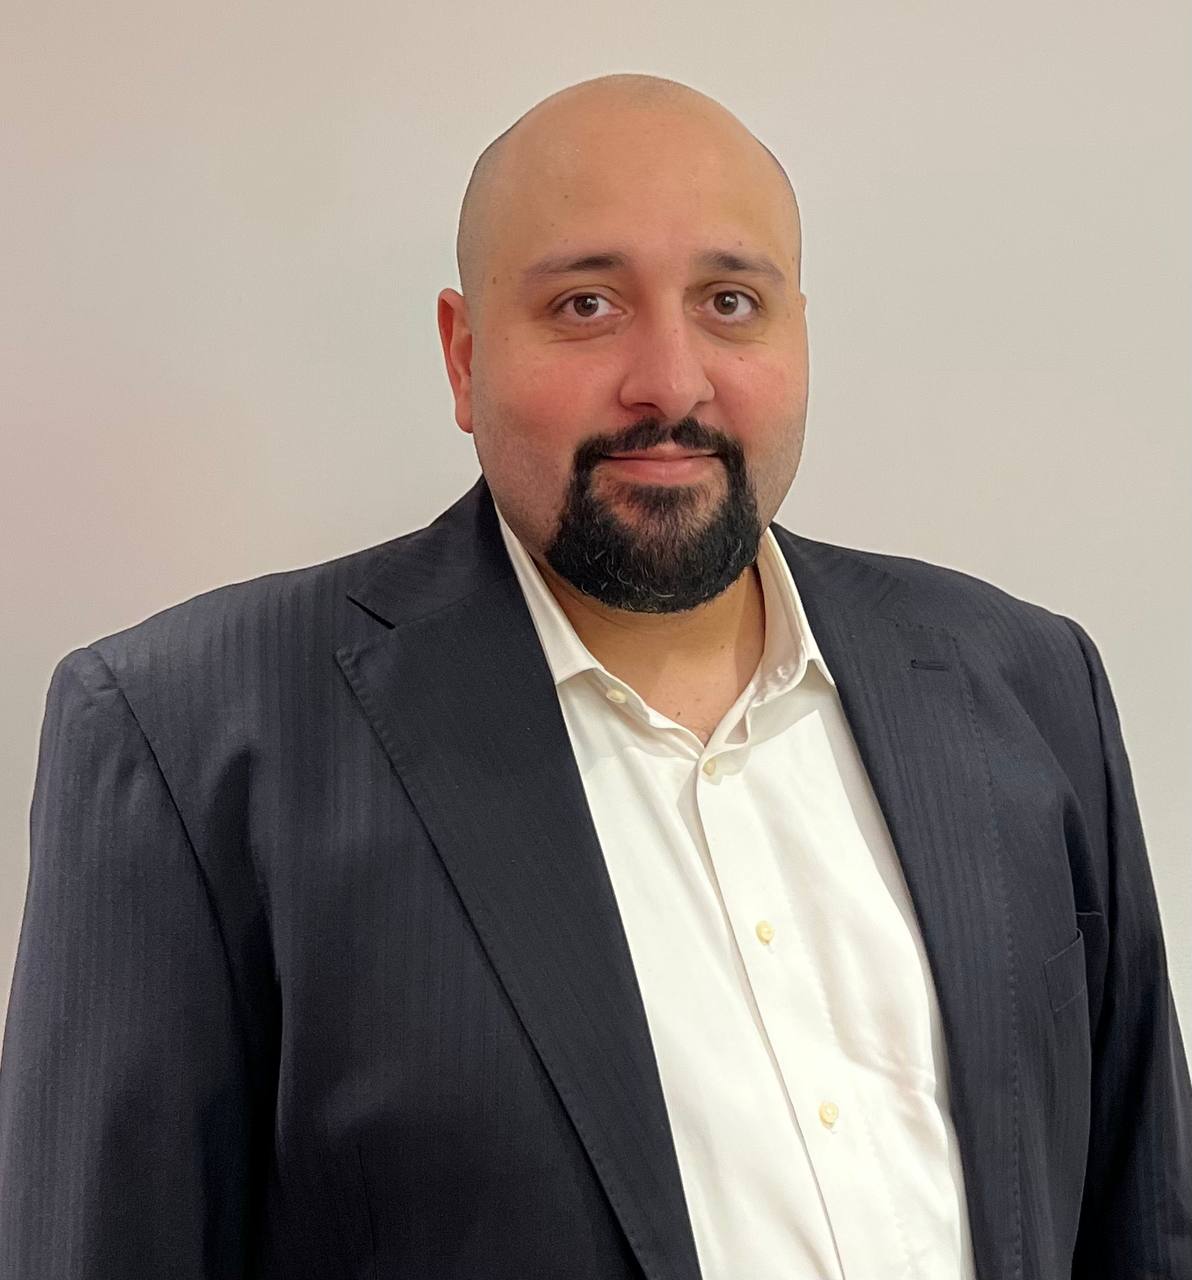 MContent appoints Hani El Khatib as the new Chief Executive Officer of blockchain & Web3